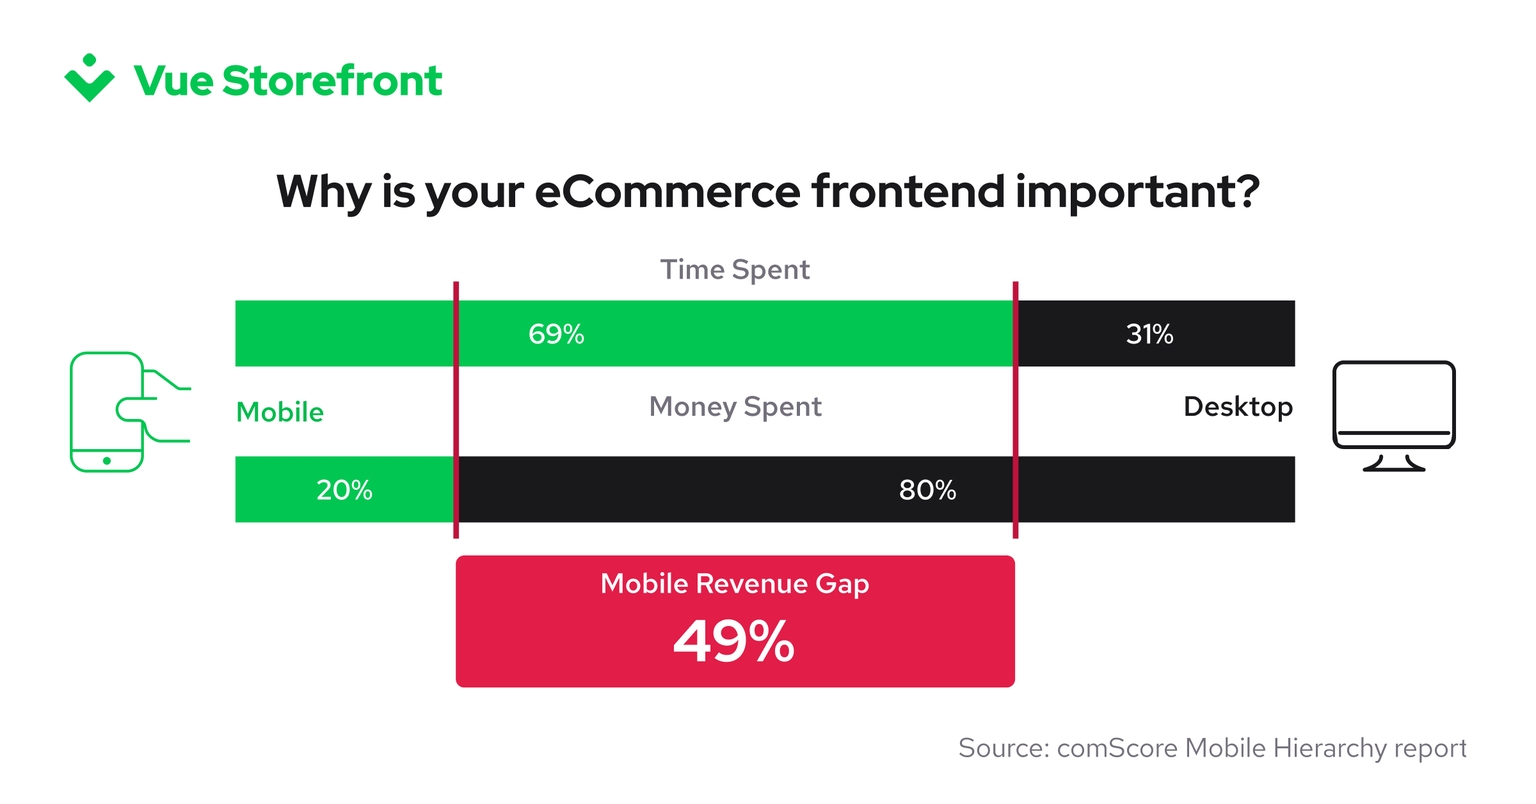 Most merchants are experiencing a mobile revenue gap of at least 49%